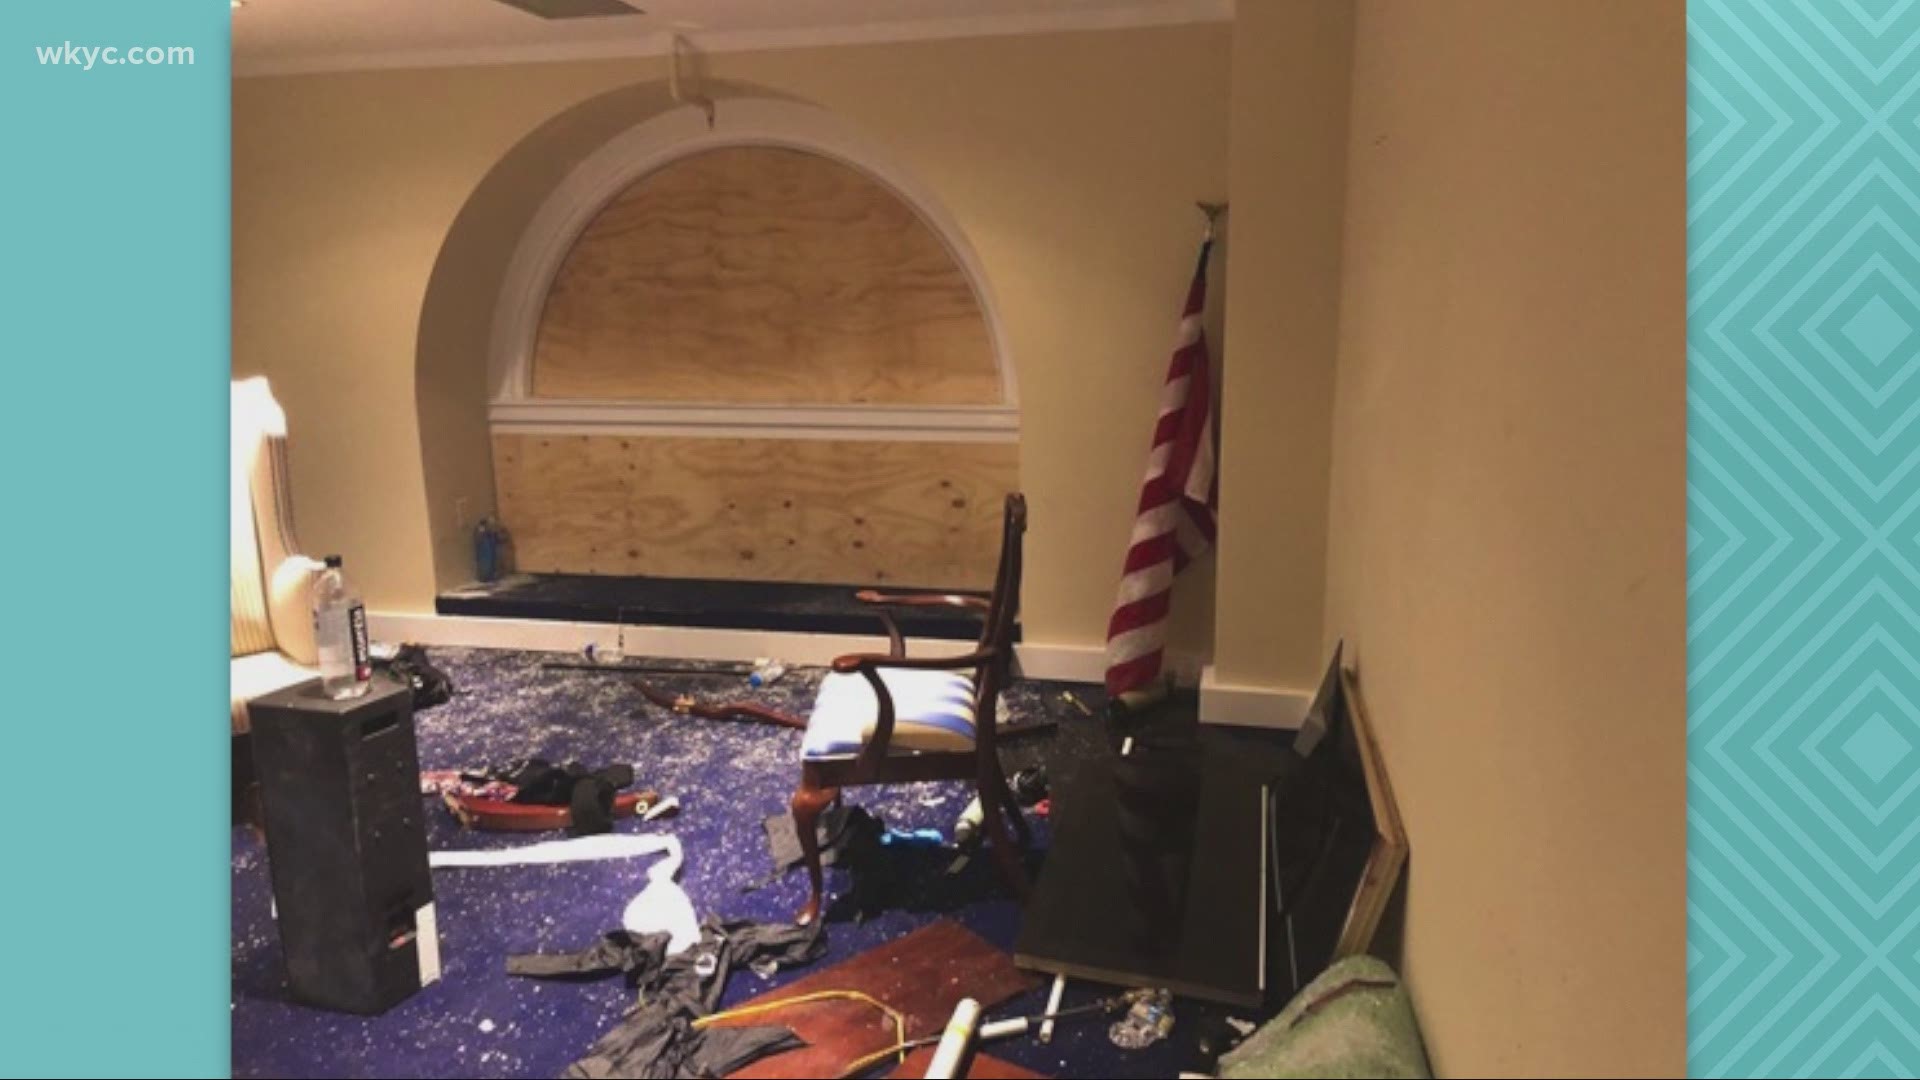 The photos show the damage that Brown said he witnessed firsthand from inside the U.S. Capitol.